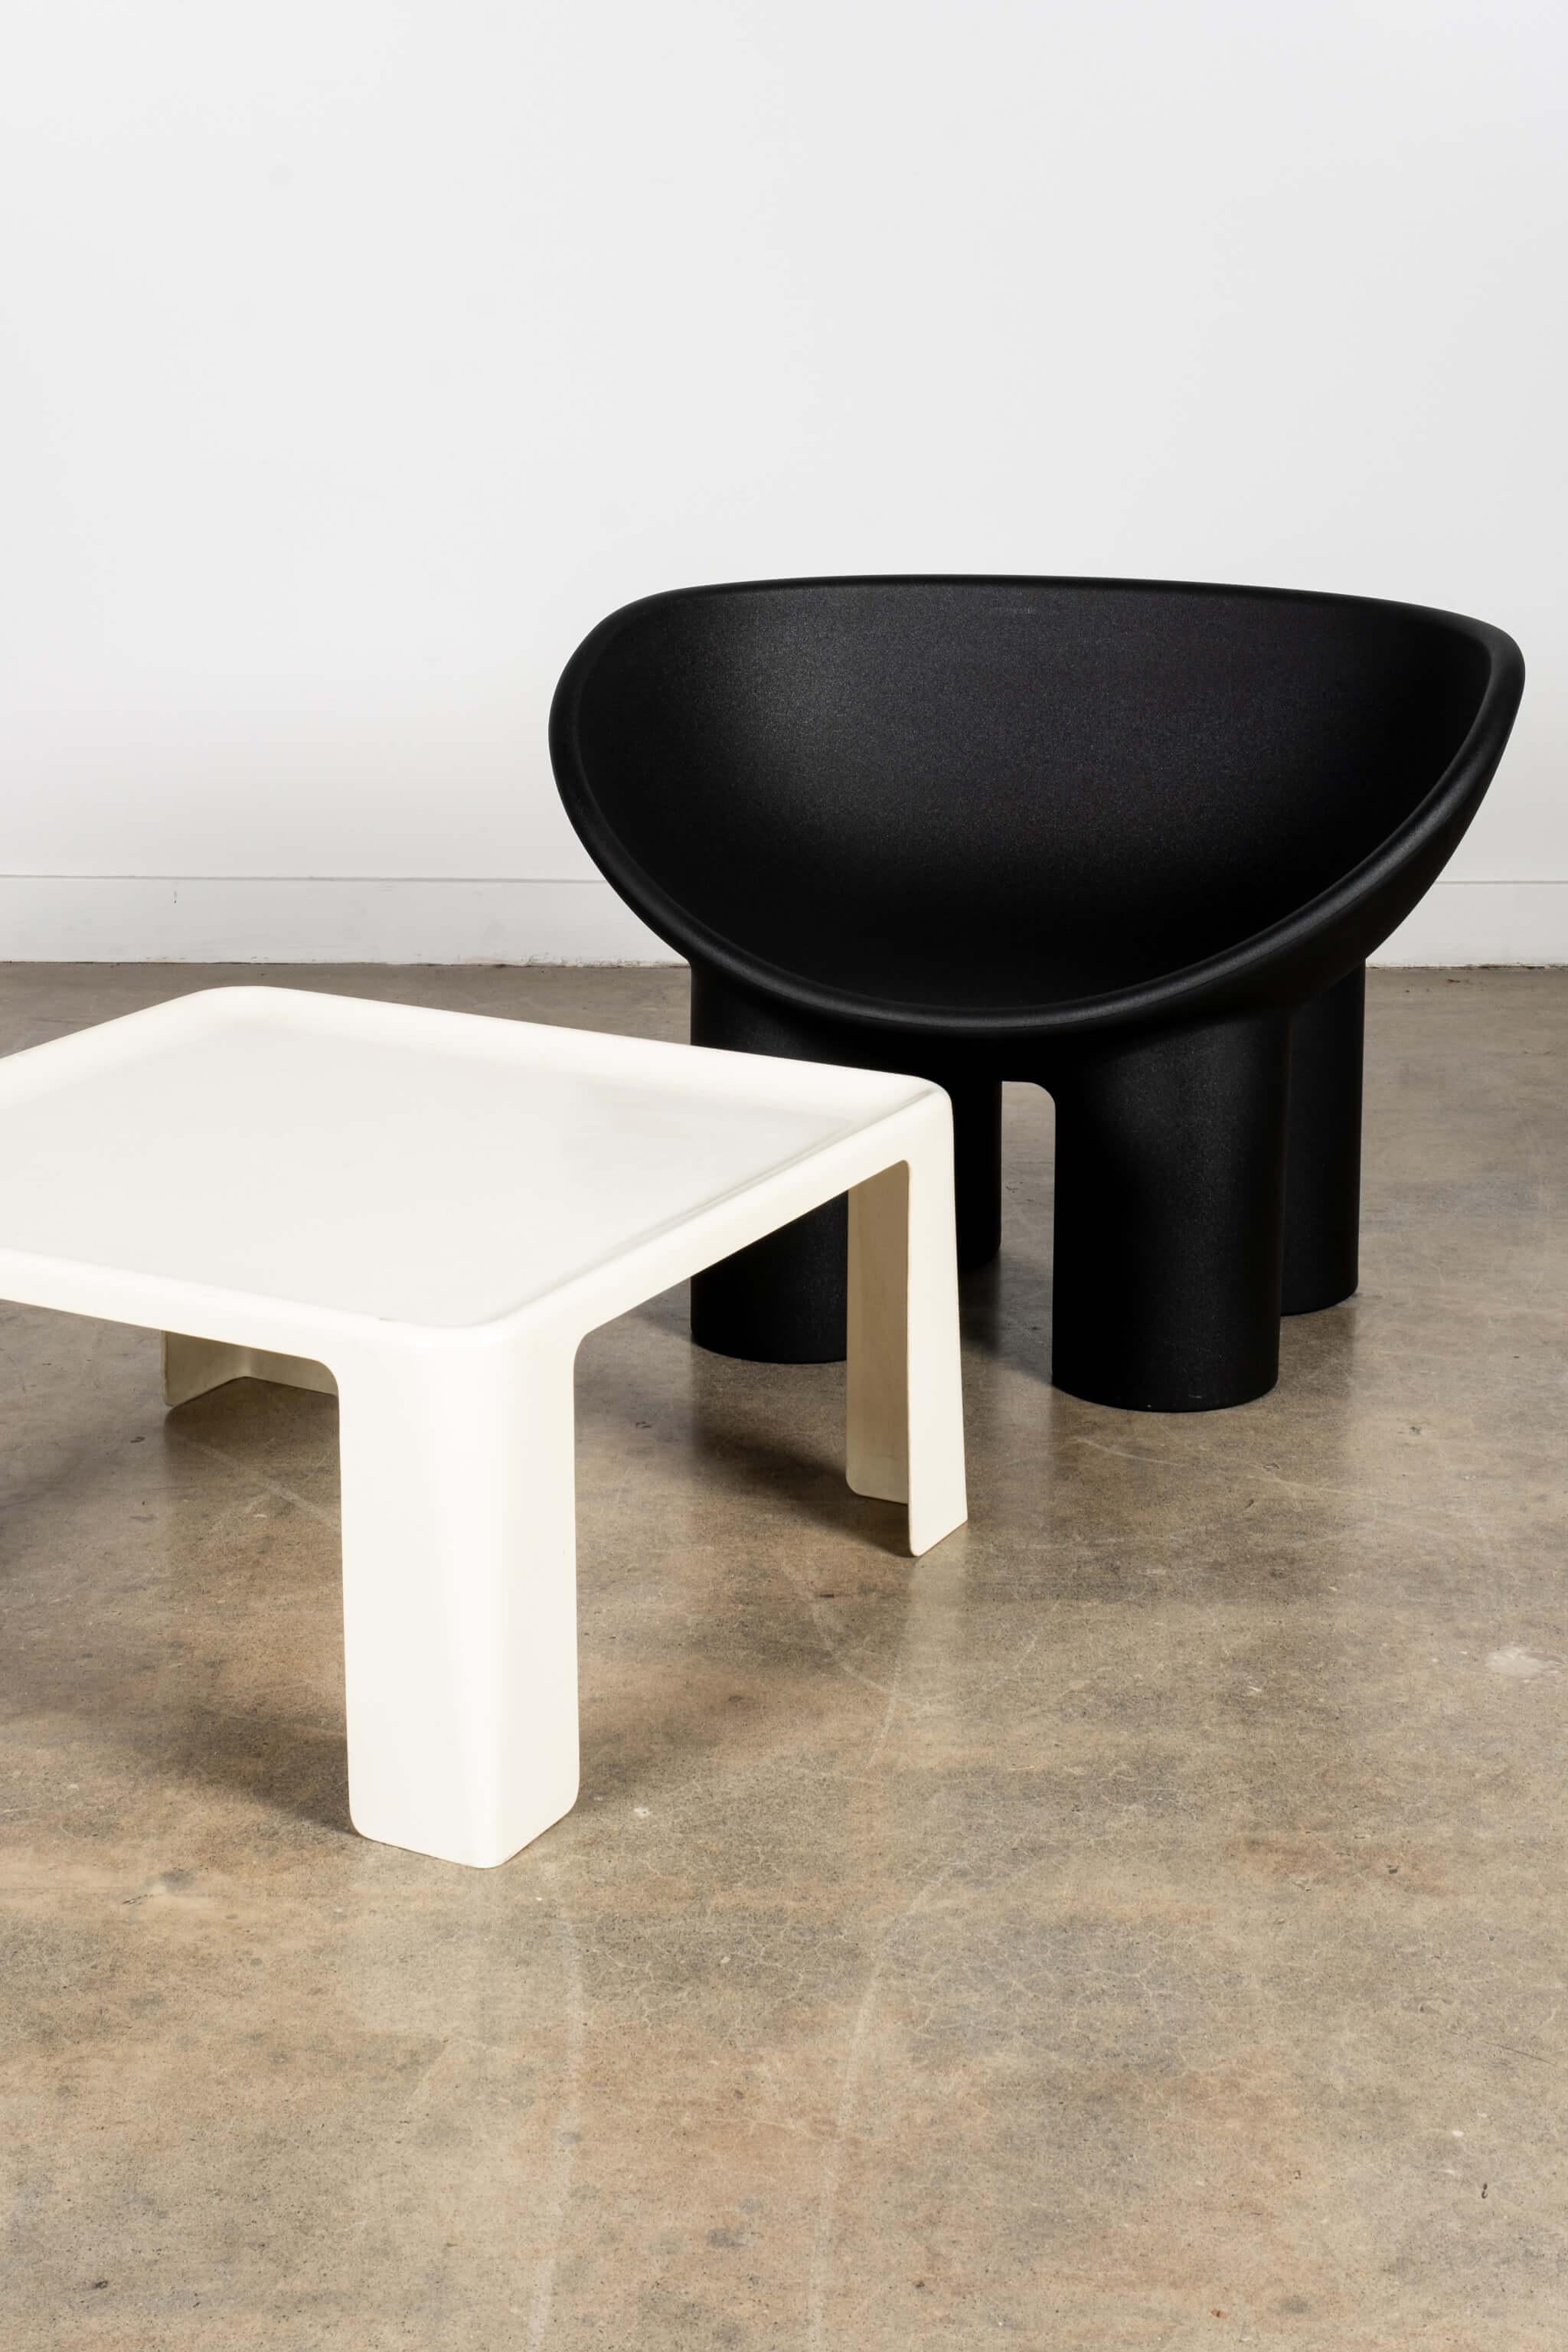 Roly Poly Chair by Faye Toogood for Driade 2